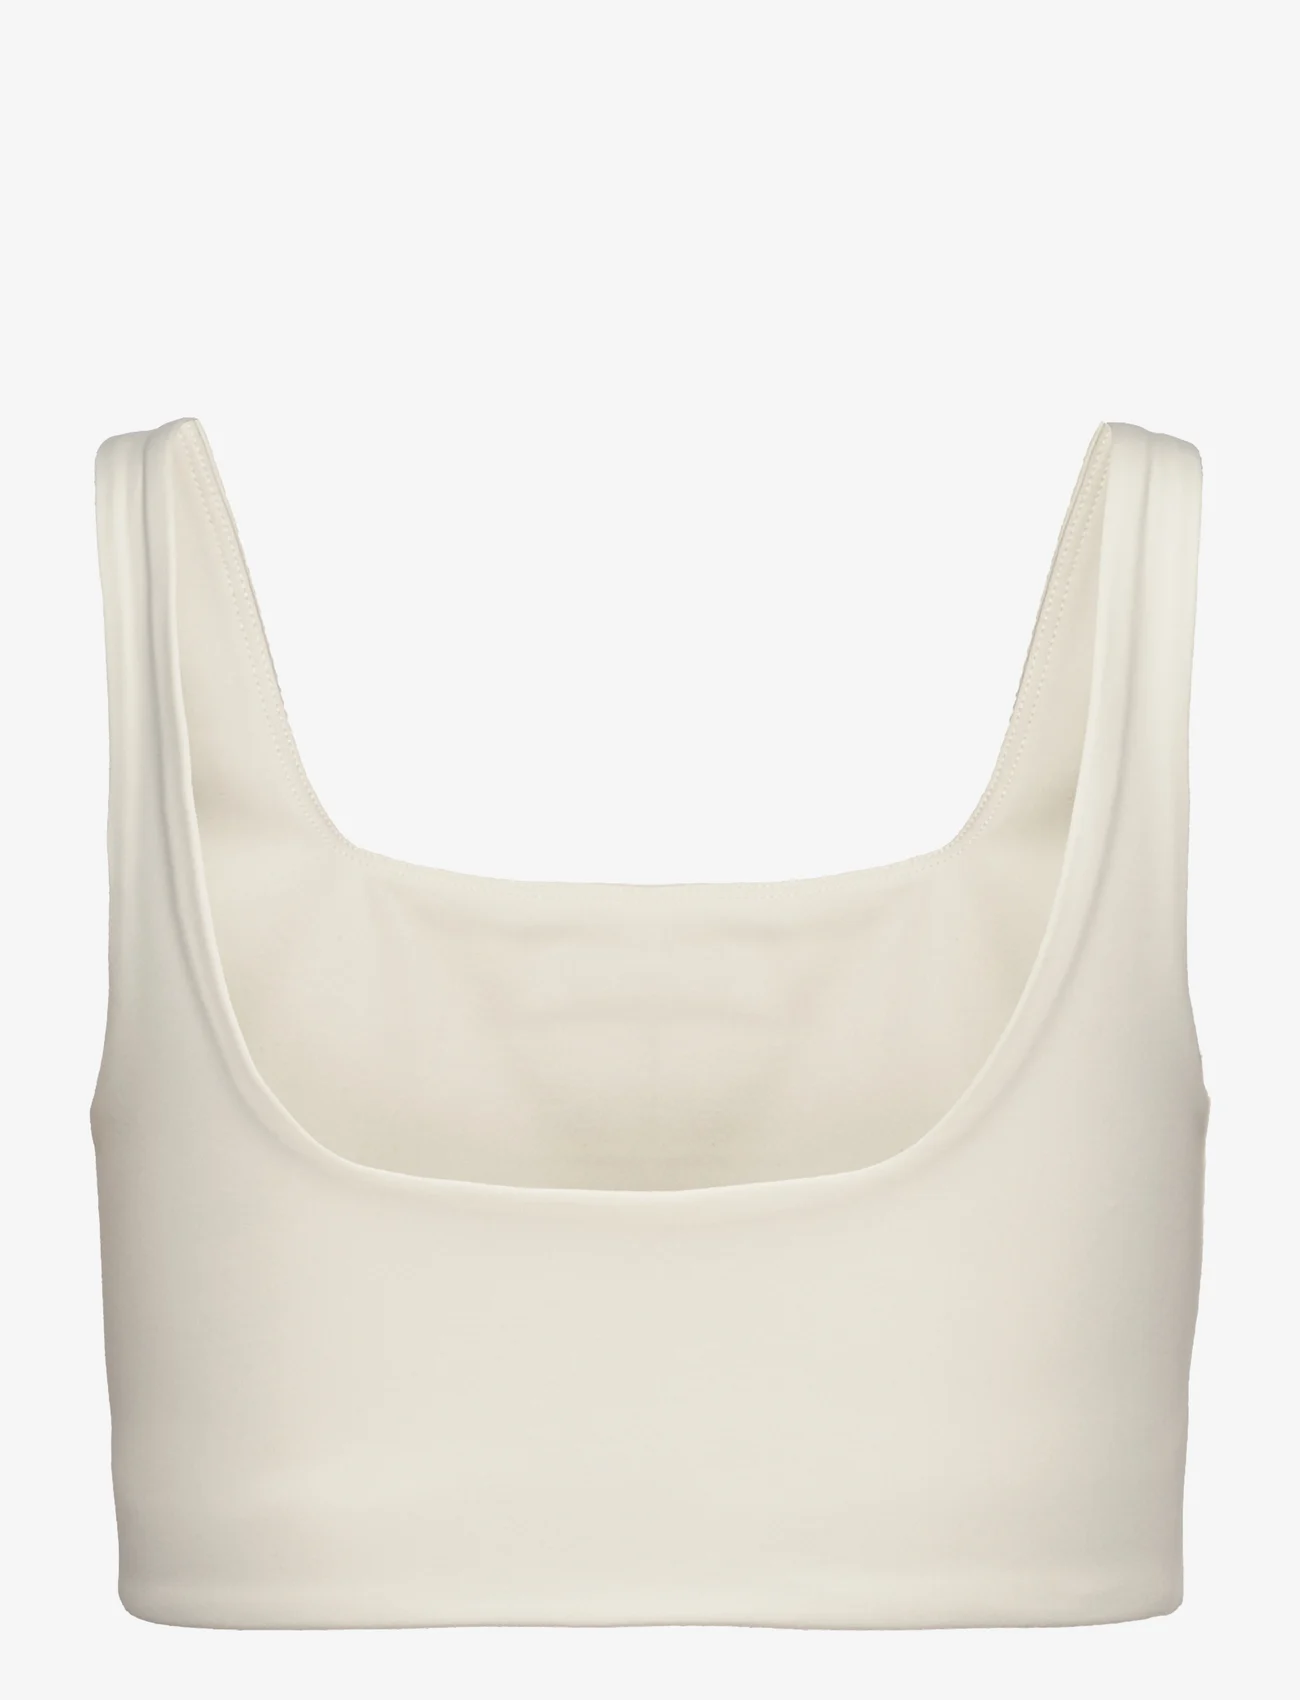 Girlfriend Collective - Tommy Bra, Square-Neck - medium support - ivory - 1